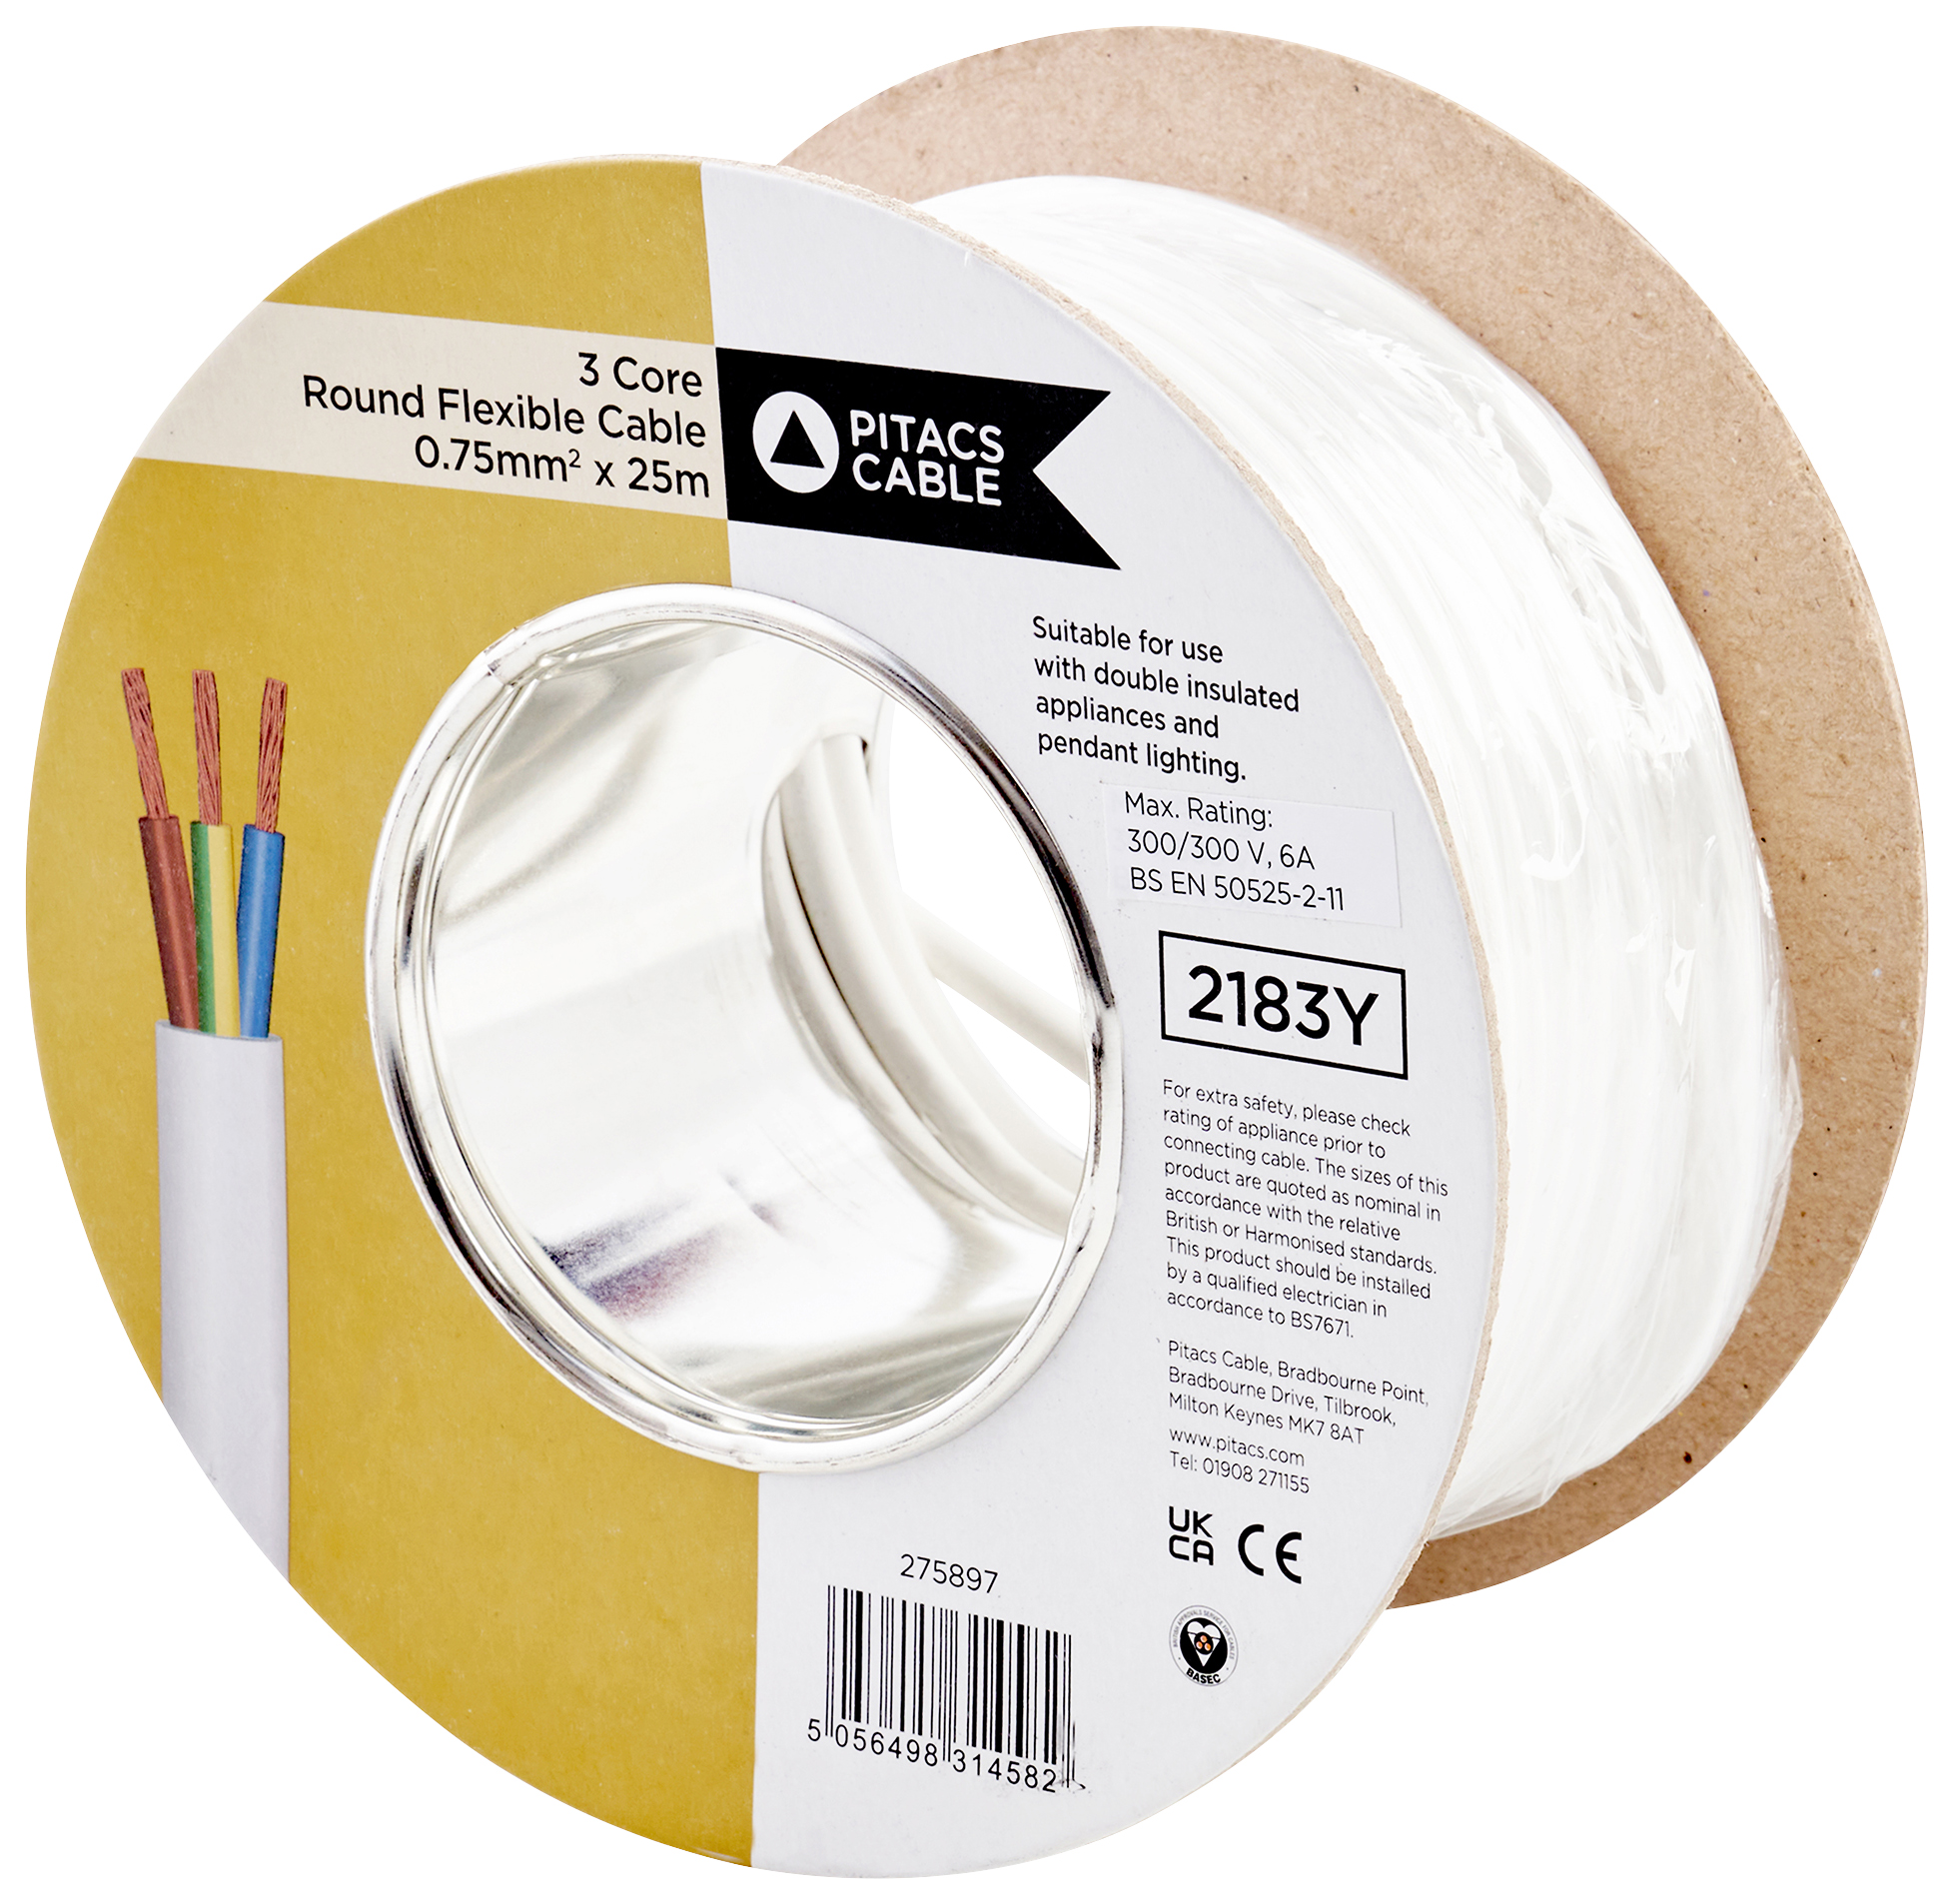 3 Core 2183Y White Round Flexible Cable - 0.75mm2 - 25m